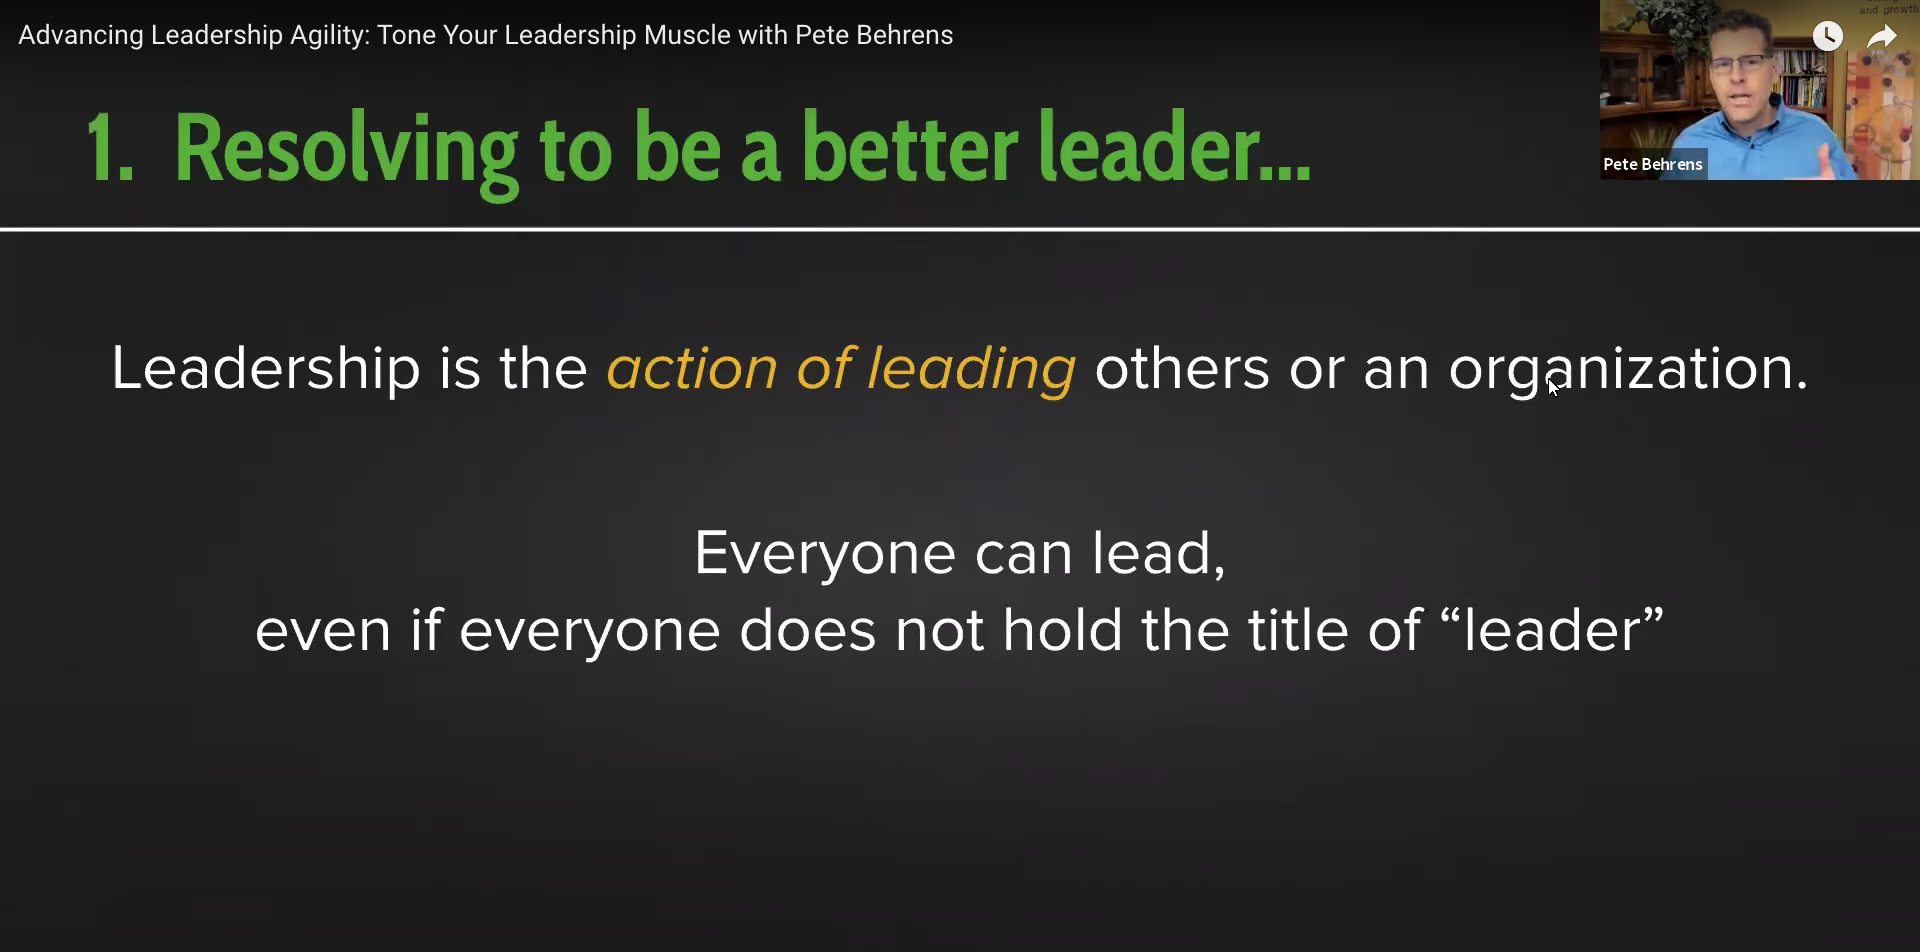 Tone Your Leadership Muscle